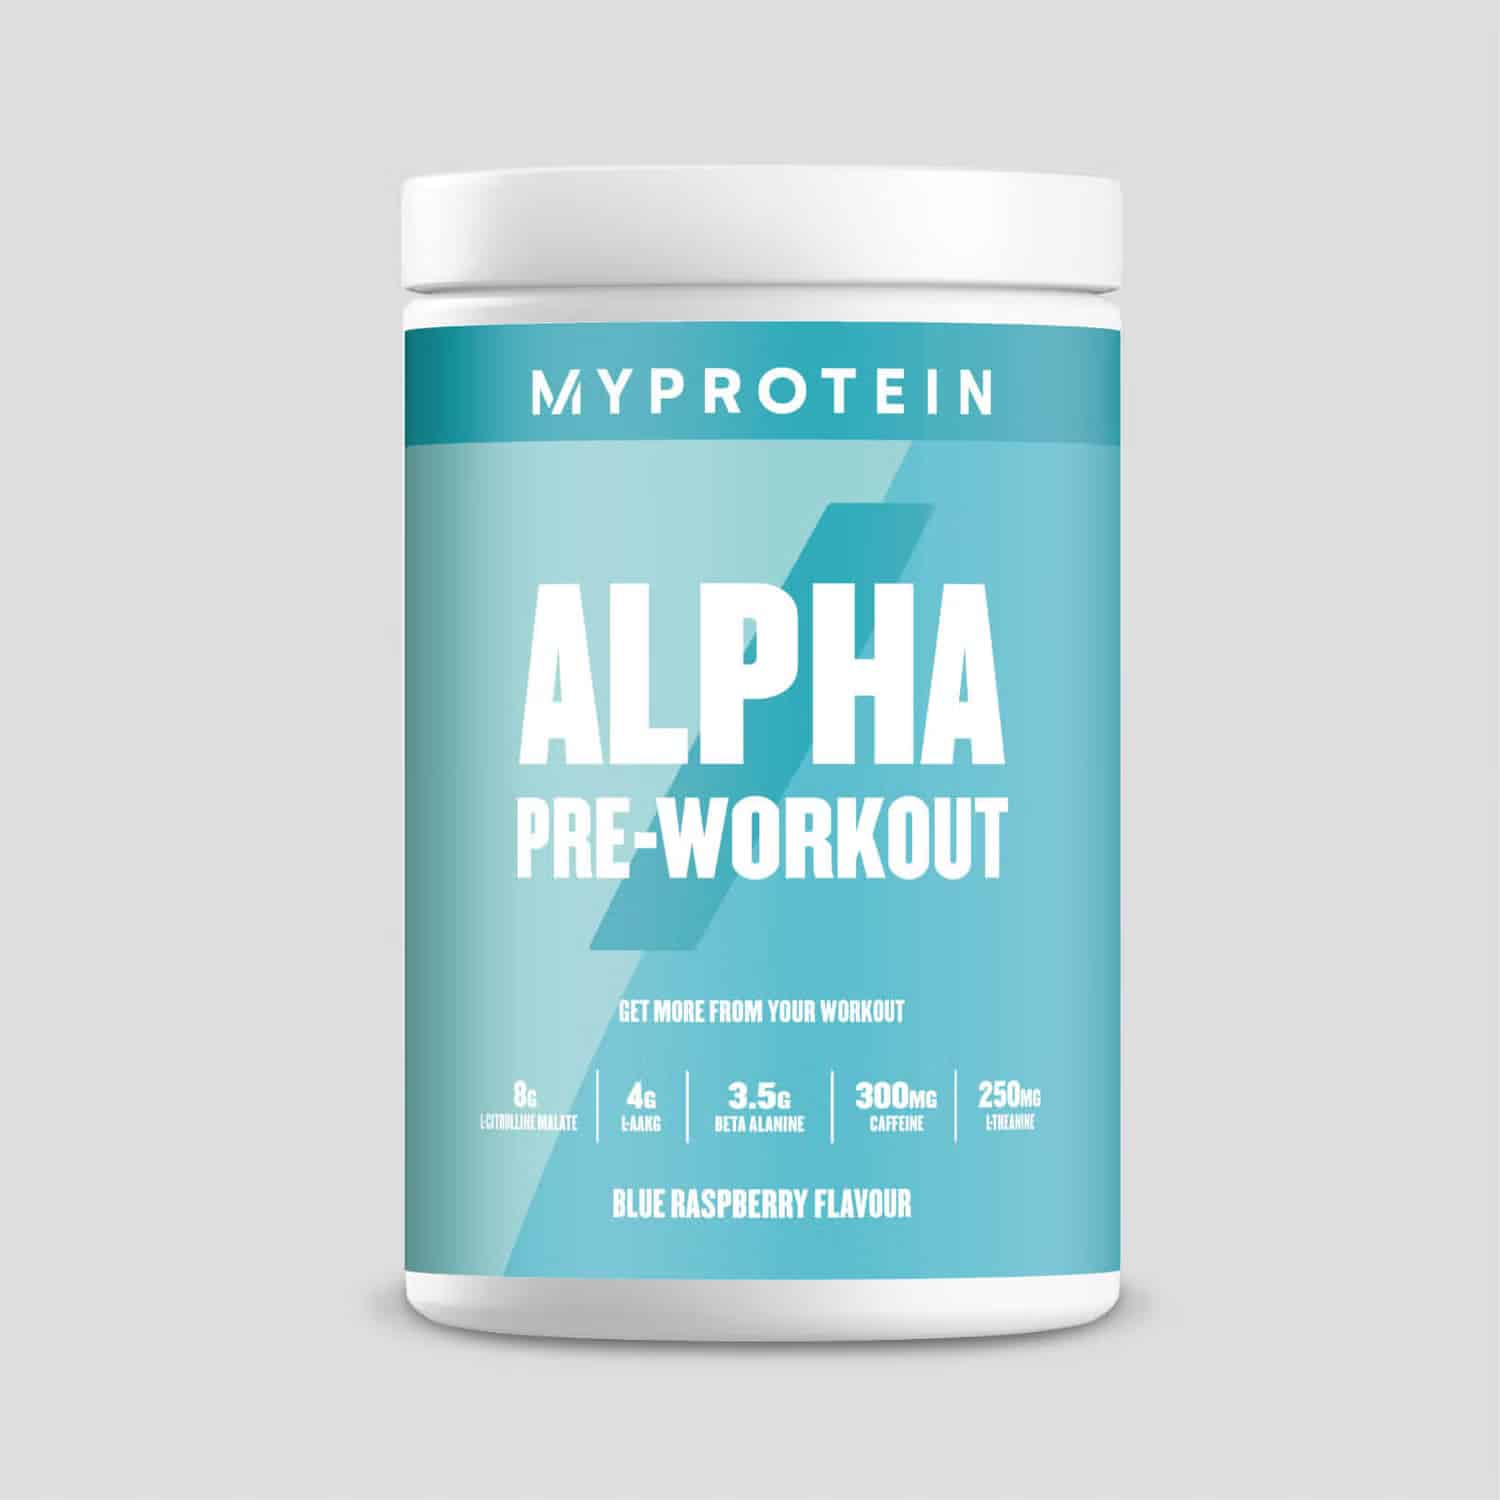 Alpha Pre-Workout 600g Discounts and Cashback